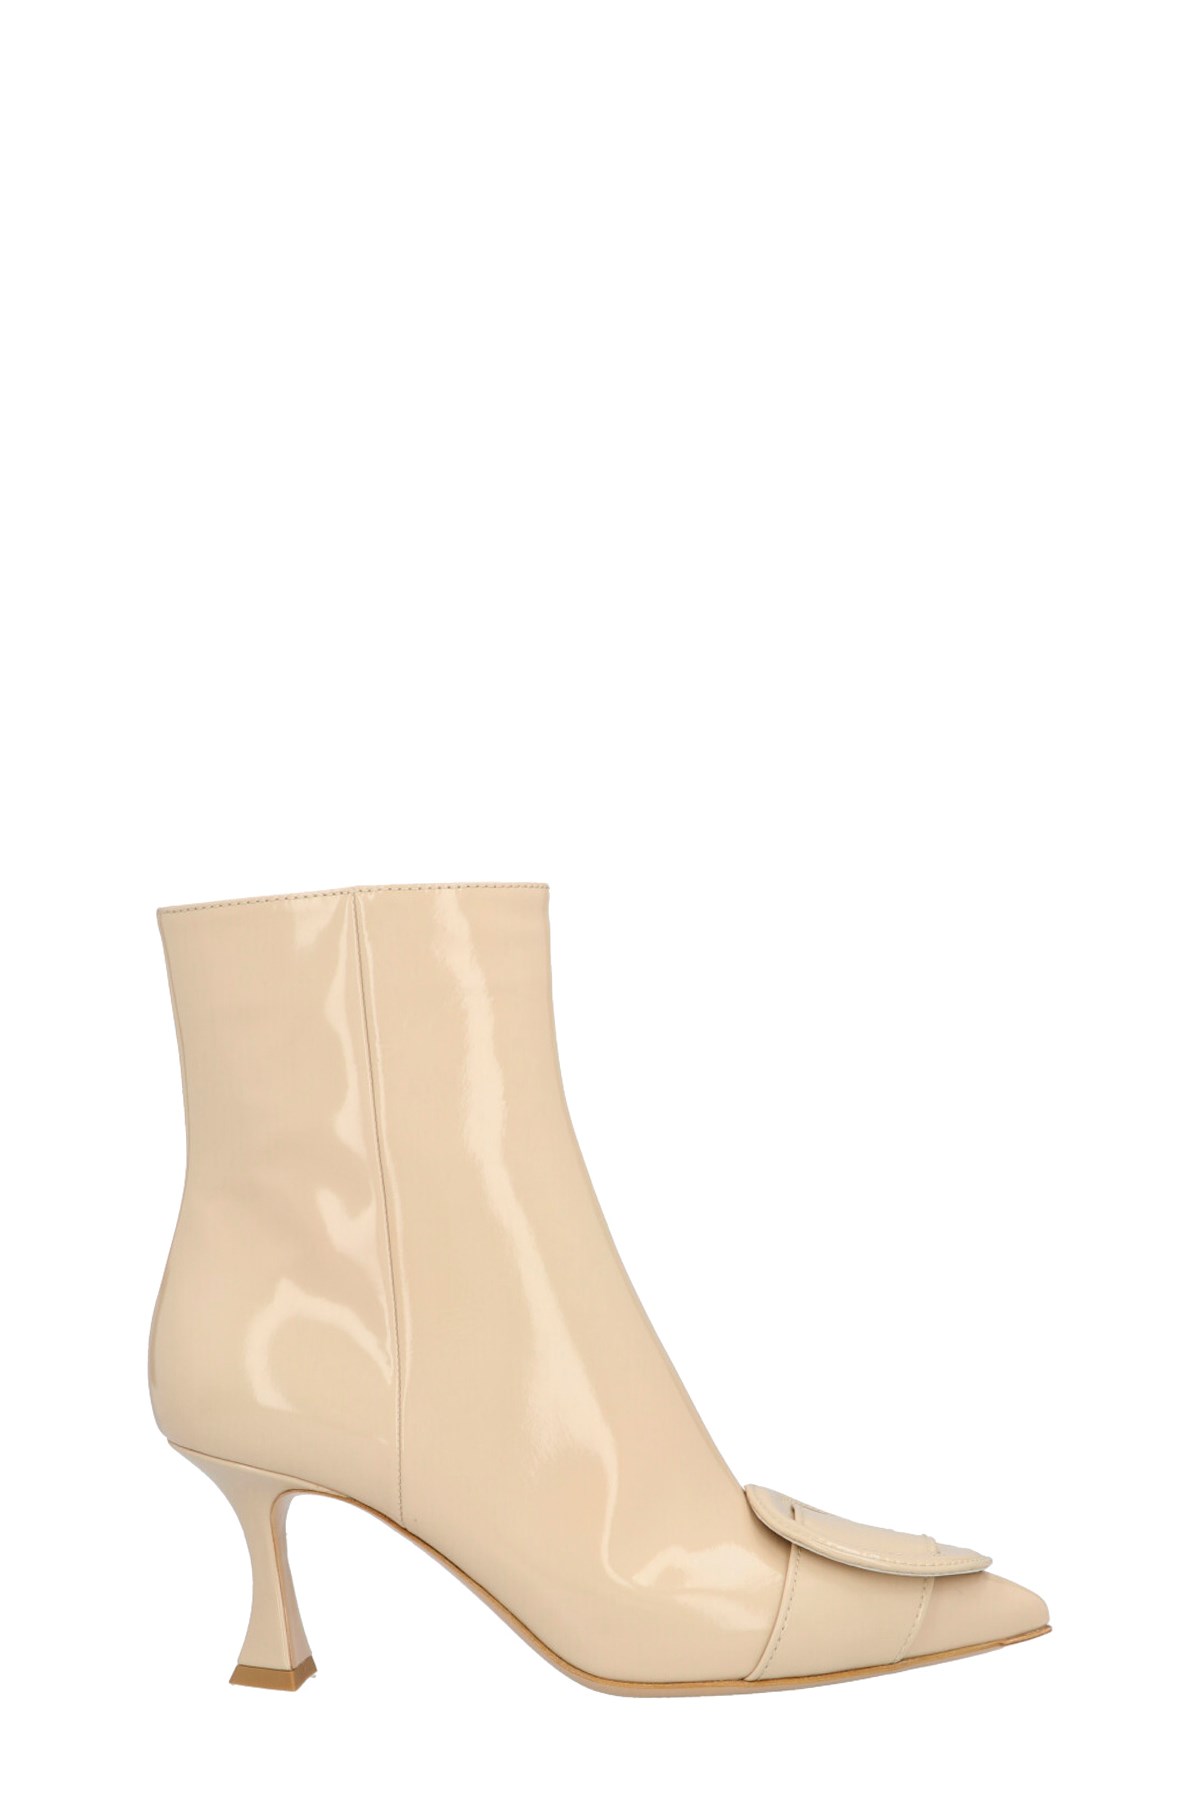 GIANVITO ROSSI 'Smart Mousse' Ankle Boots